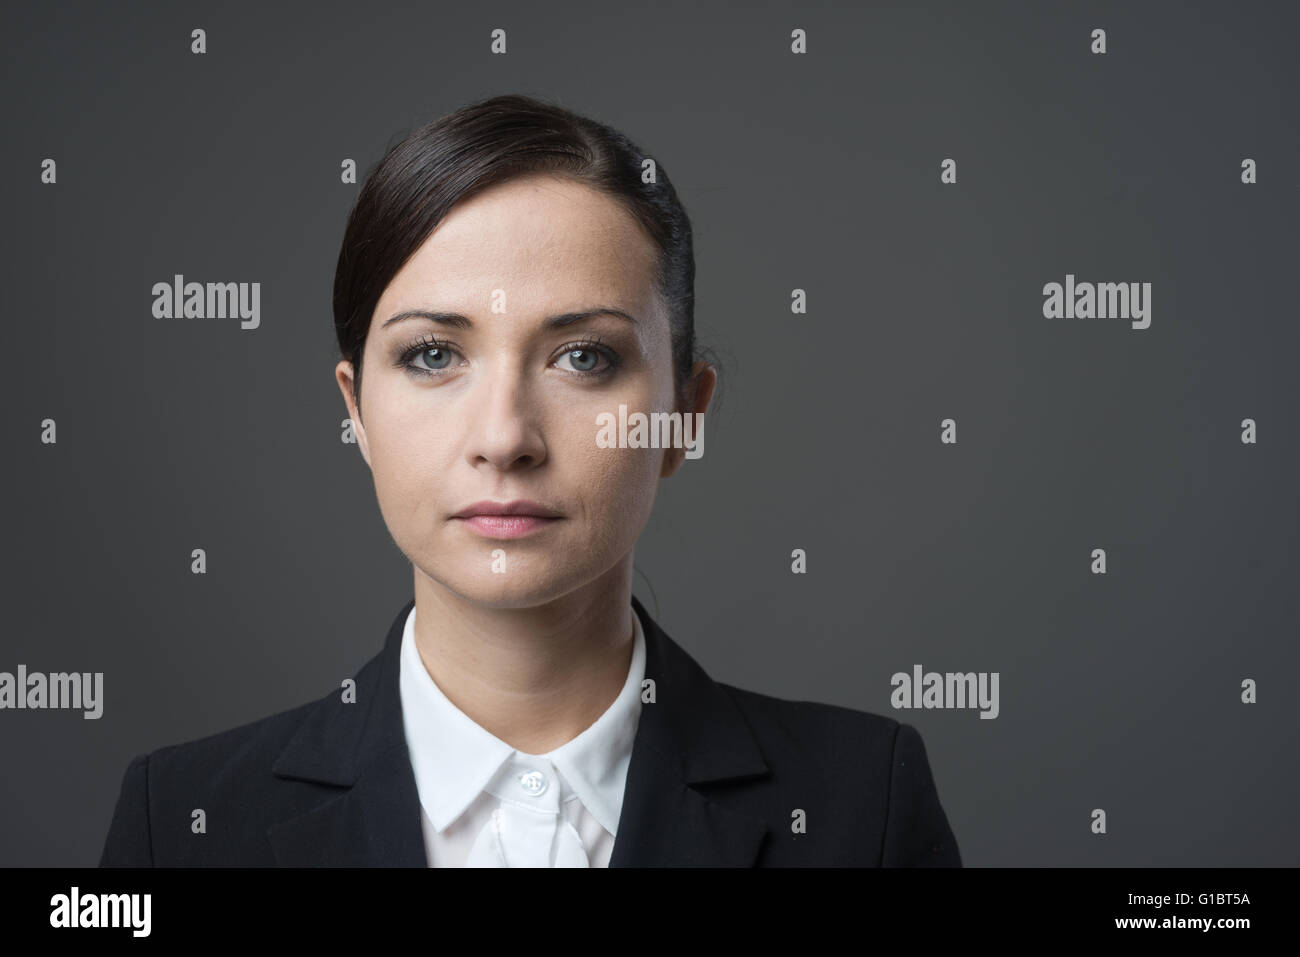 Serious businesswoman looking at camera on gray background, confident attitude. Stock Photo